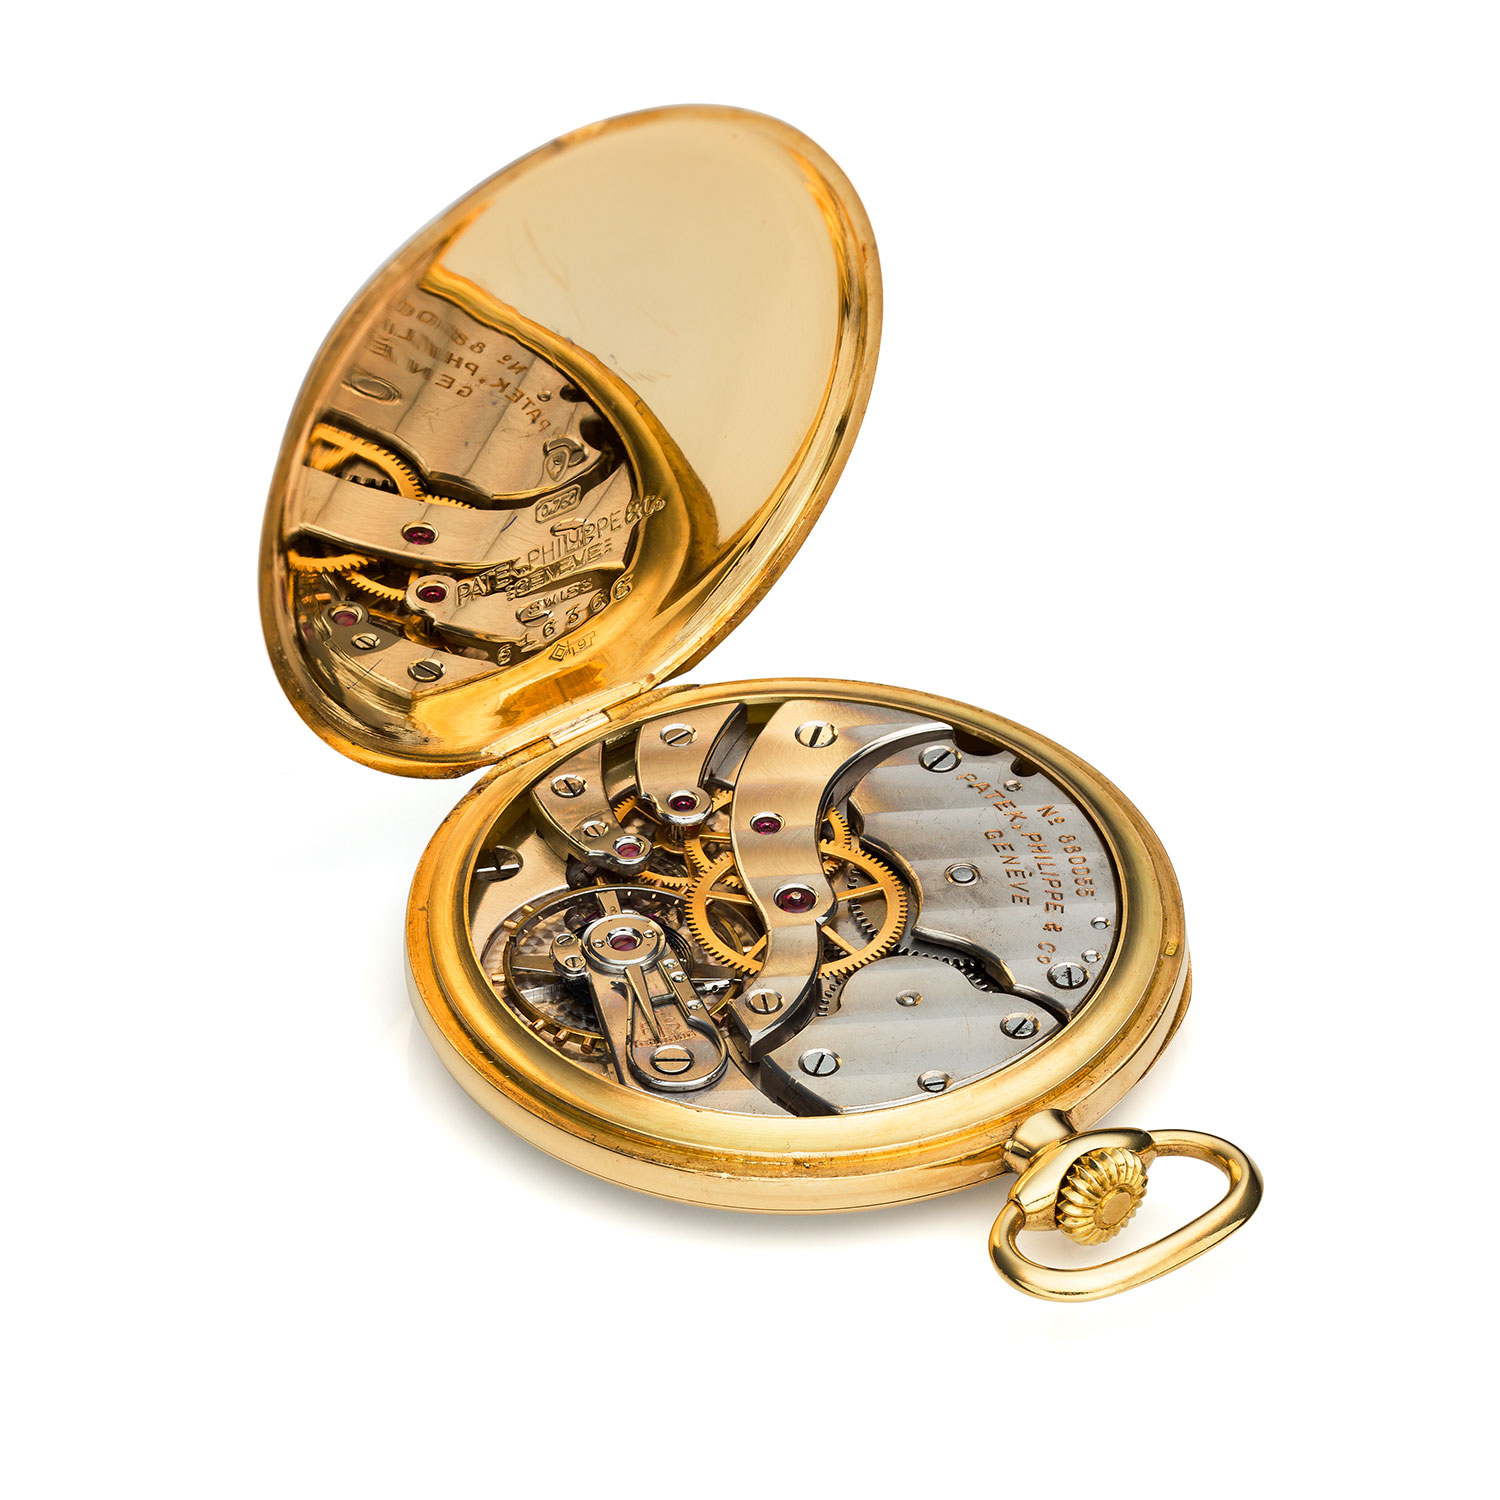 PATEK PHILIPPE POCKET WATCH REF. 652 - Collectability